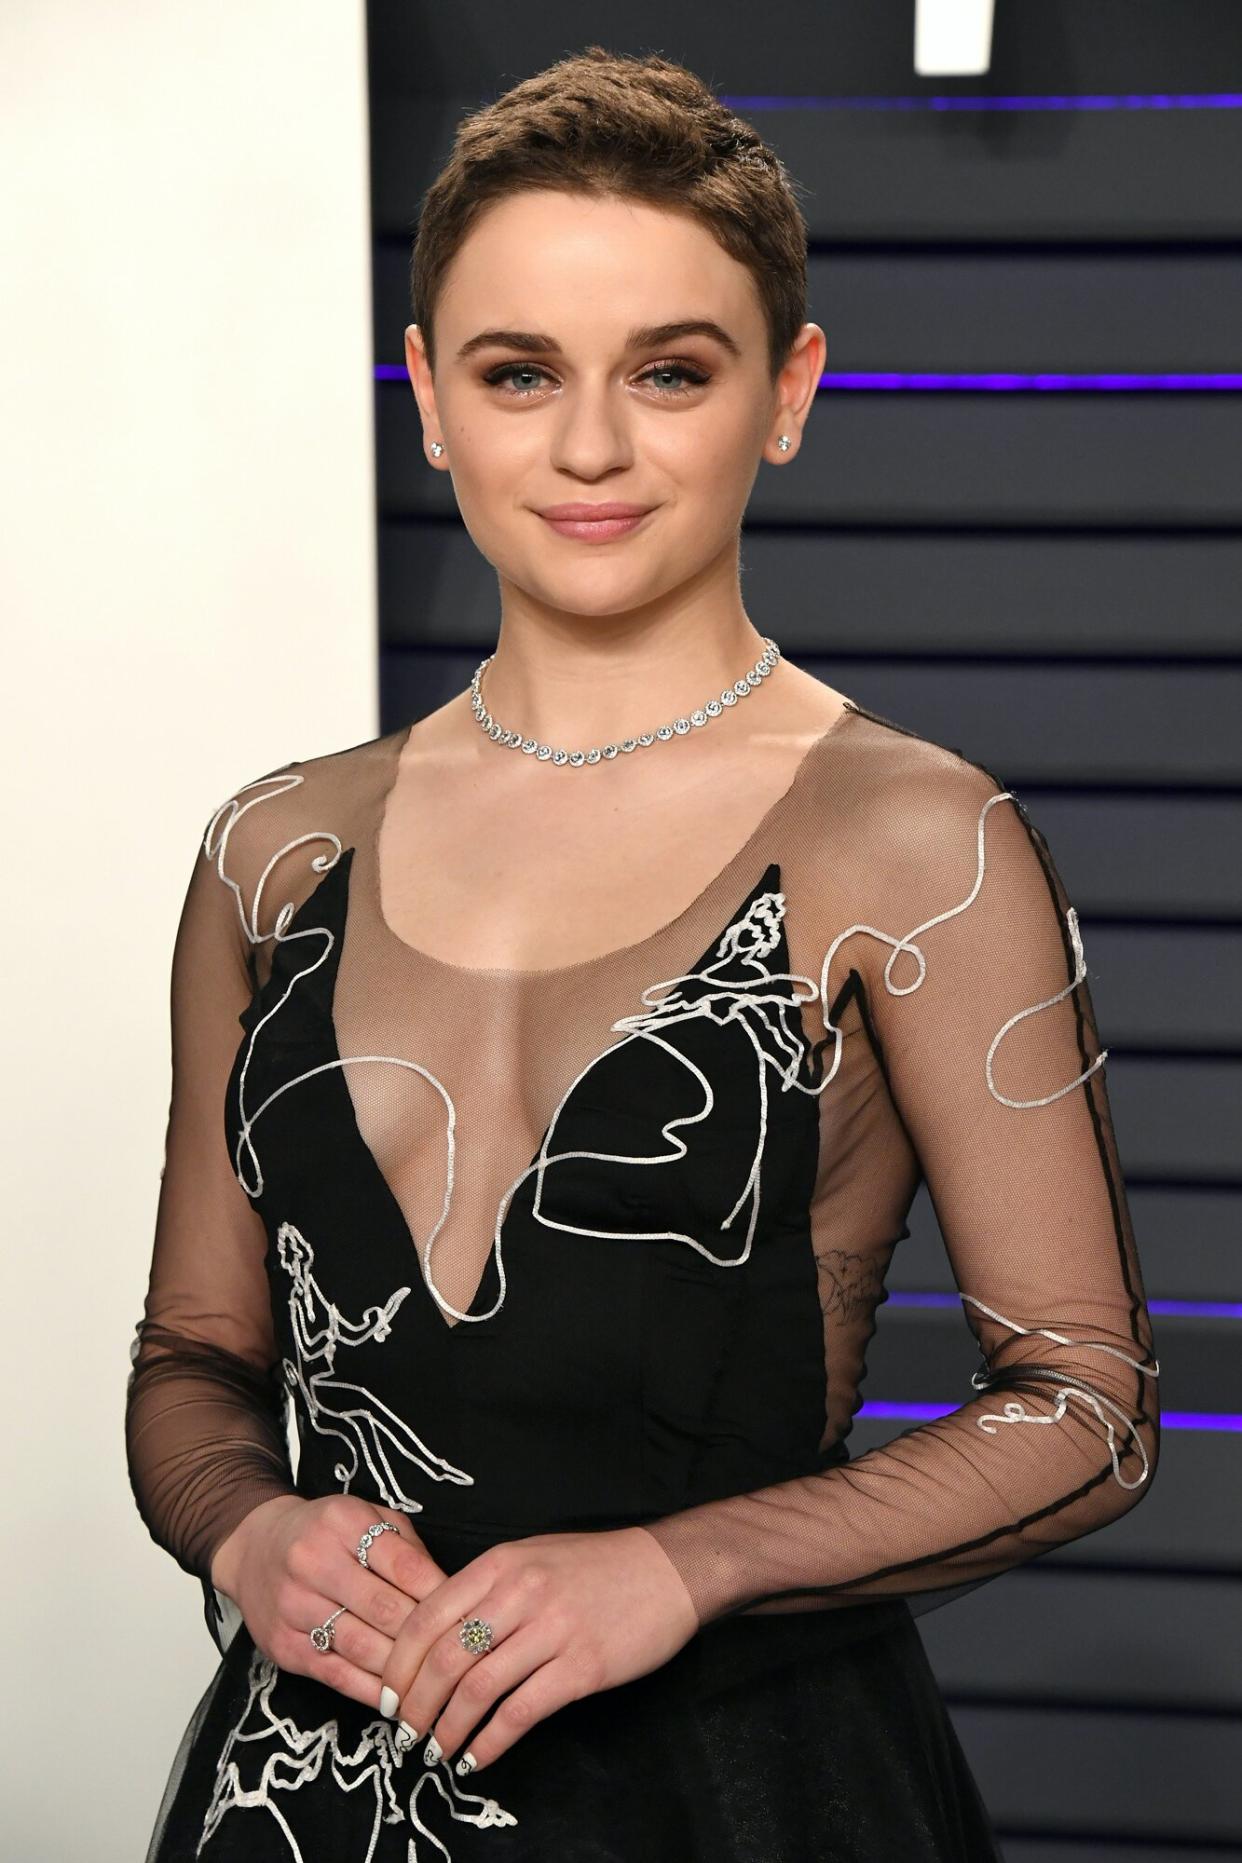 Joey King attends the 2019 Vanity Fair Oscar Party hosted by Radhika Jones at Wallis Annenberg Center for the Performing Arts on February 24, 2019 in Beverly Hills, California.